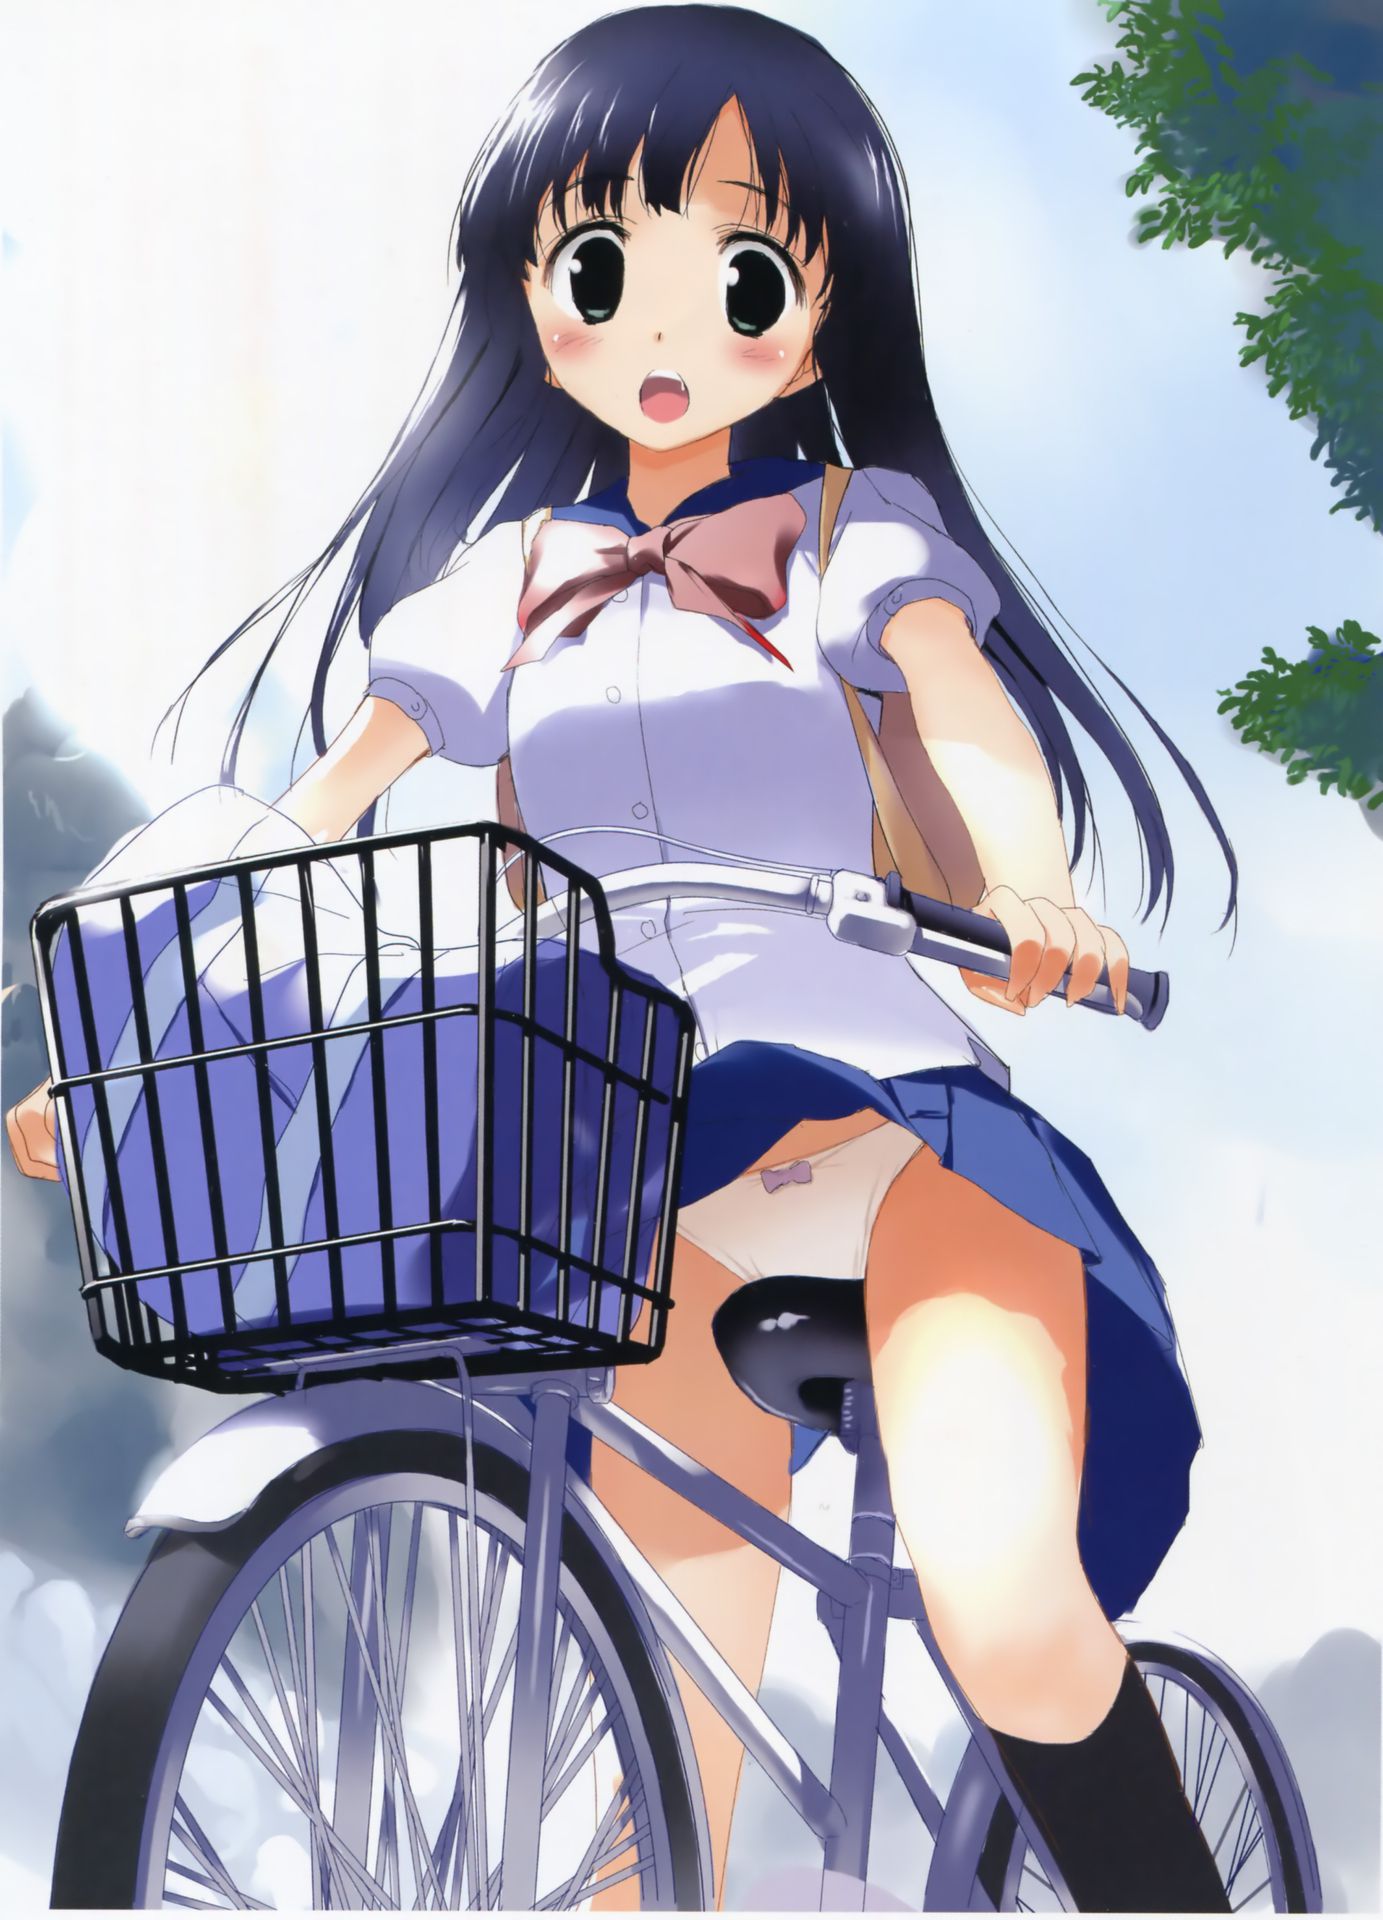 【Secondary】Erotic image of "bicycle panchira" where a country schoolgirl serves a salaryman on her way to work every morning 18